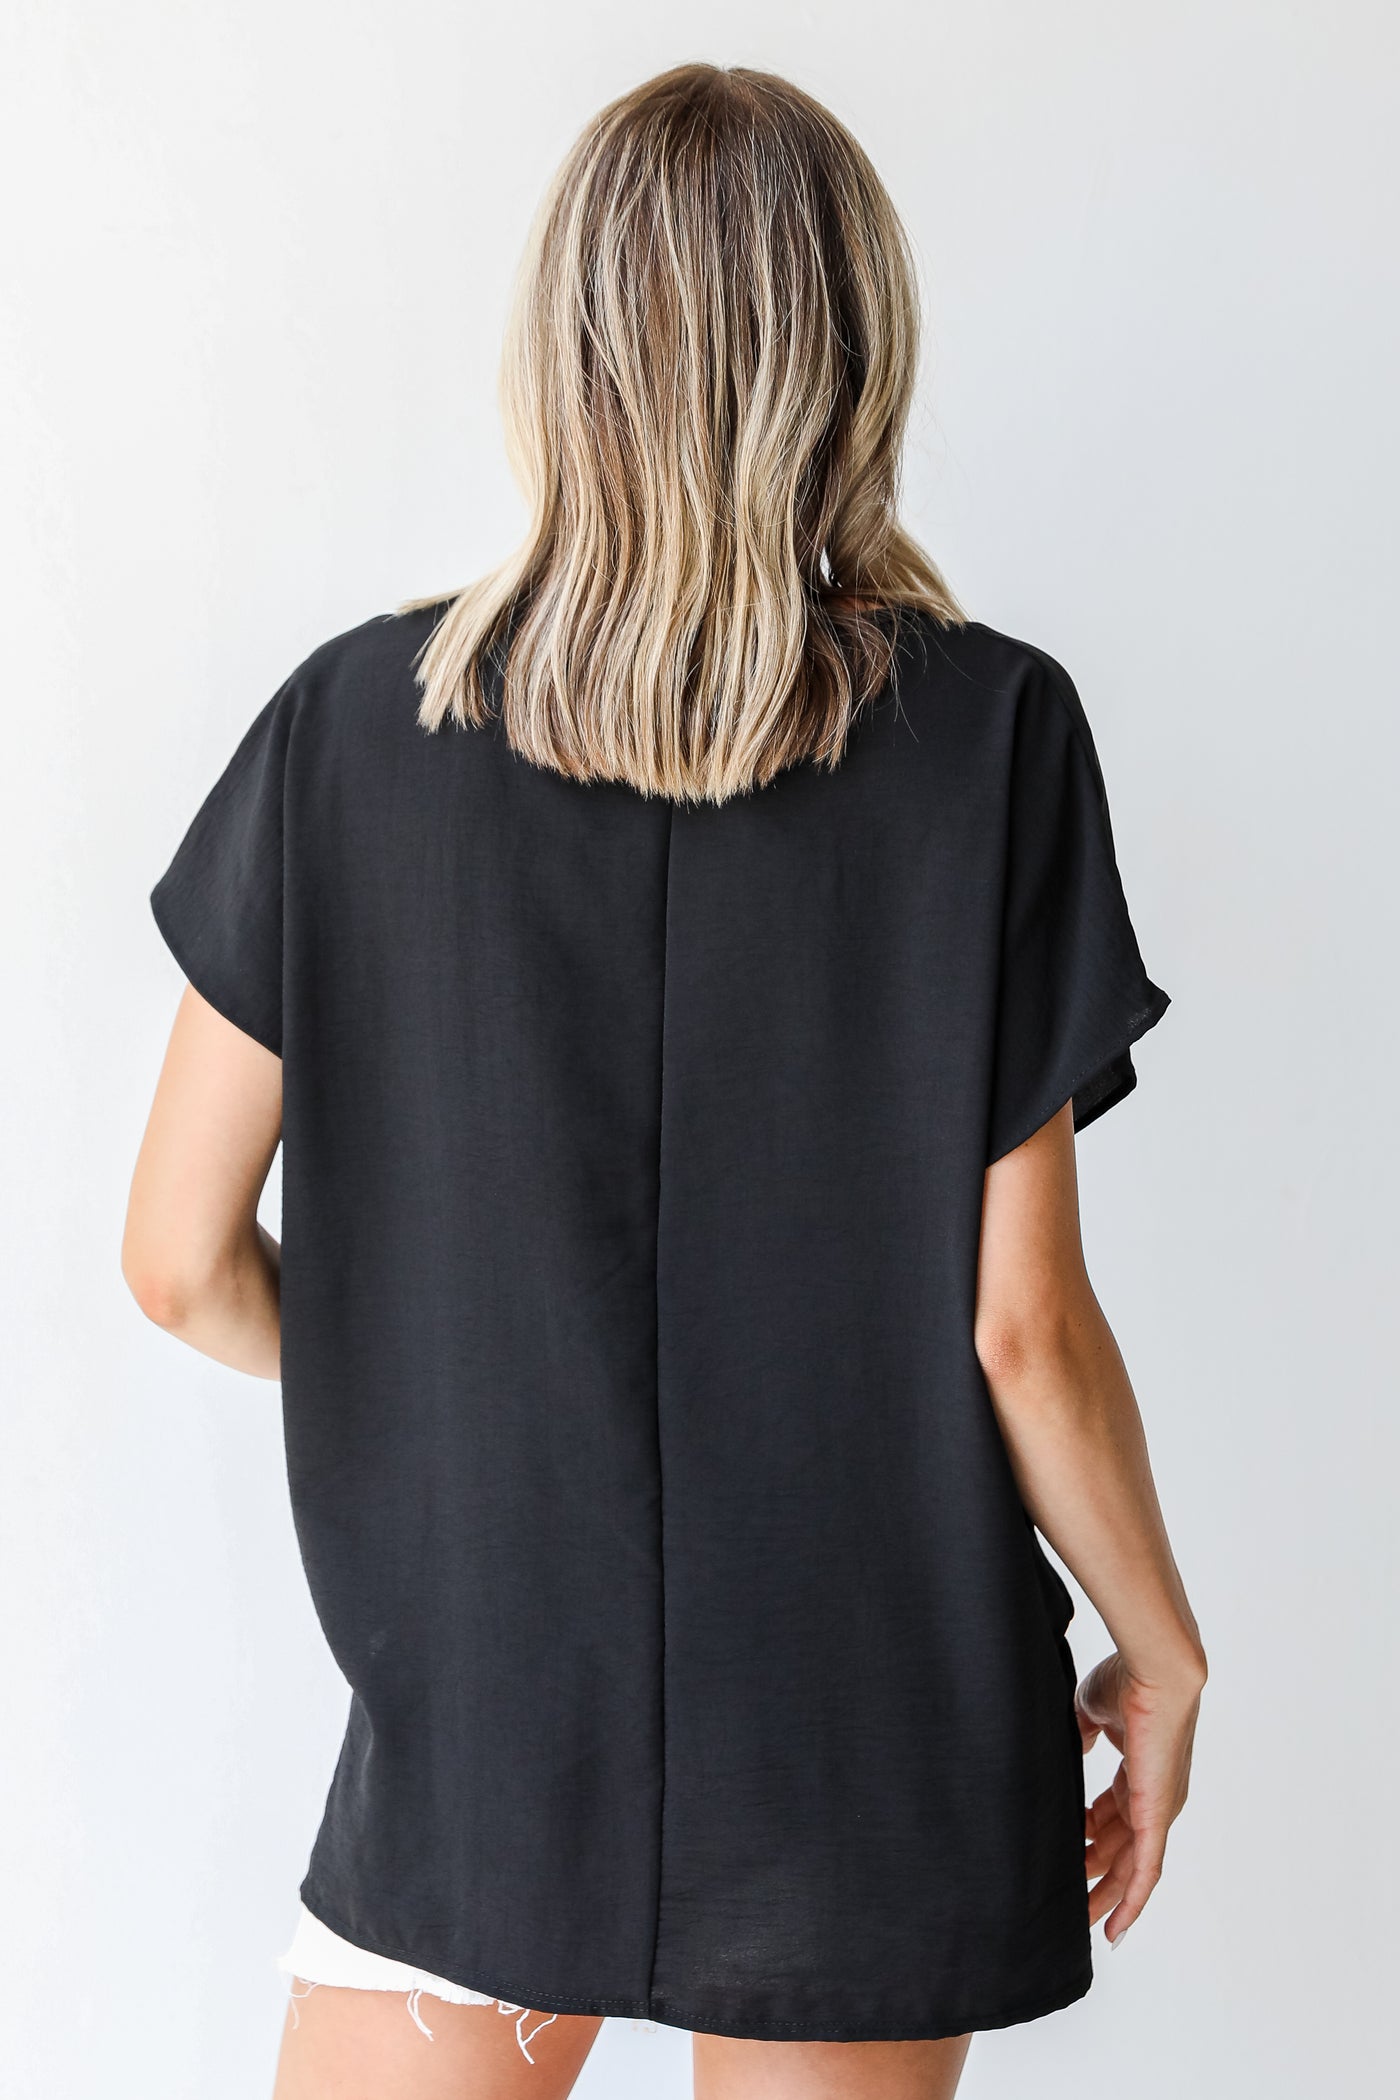 Blouse in black back view